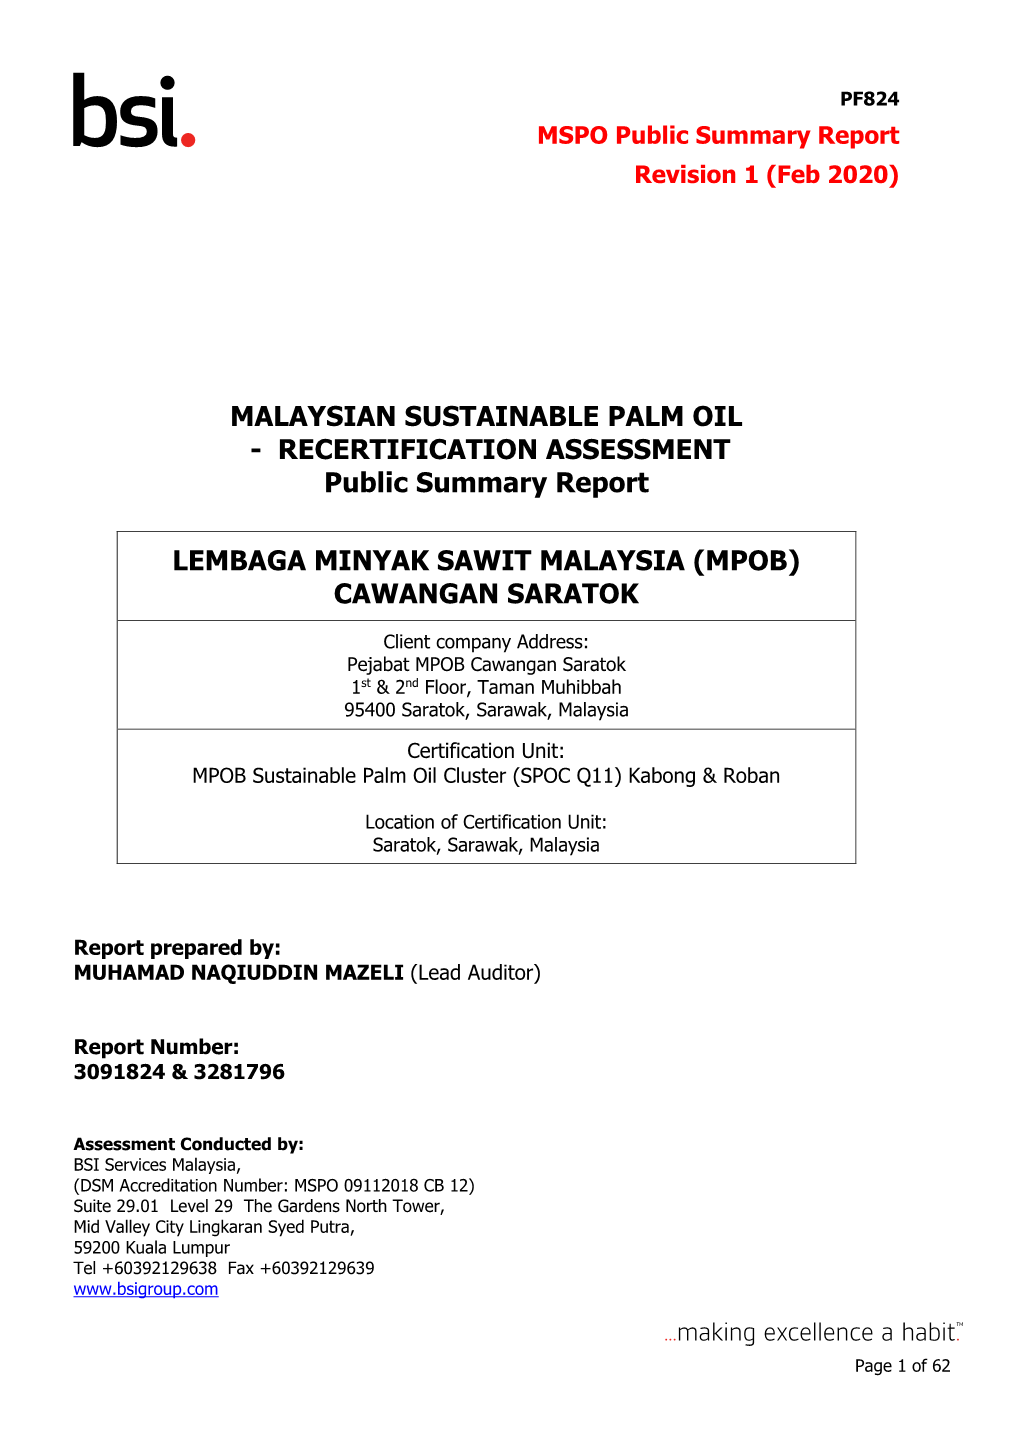 Sustainable Palm Oil Cluster Kabong & Roban (Q11)